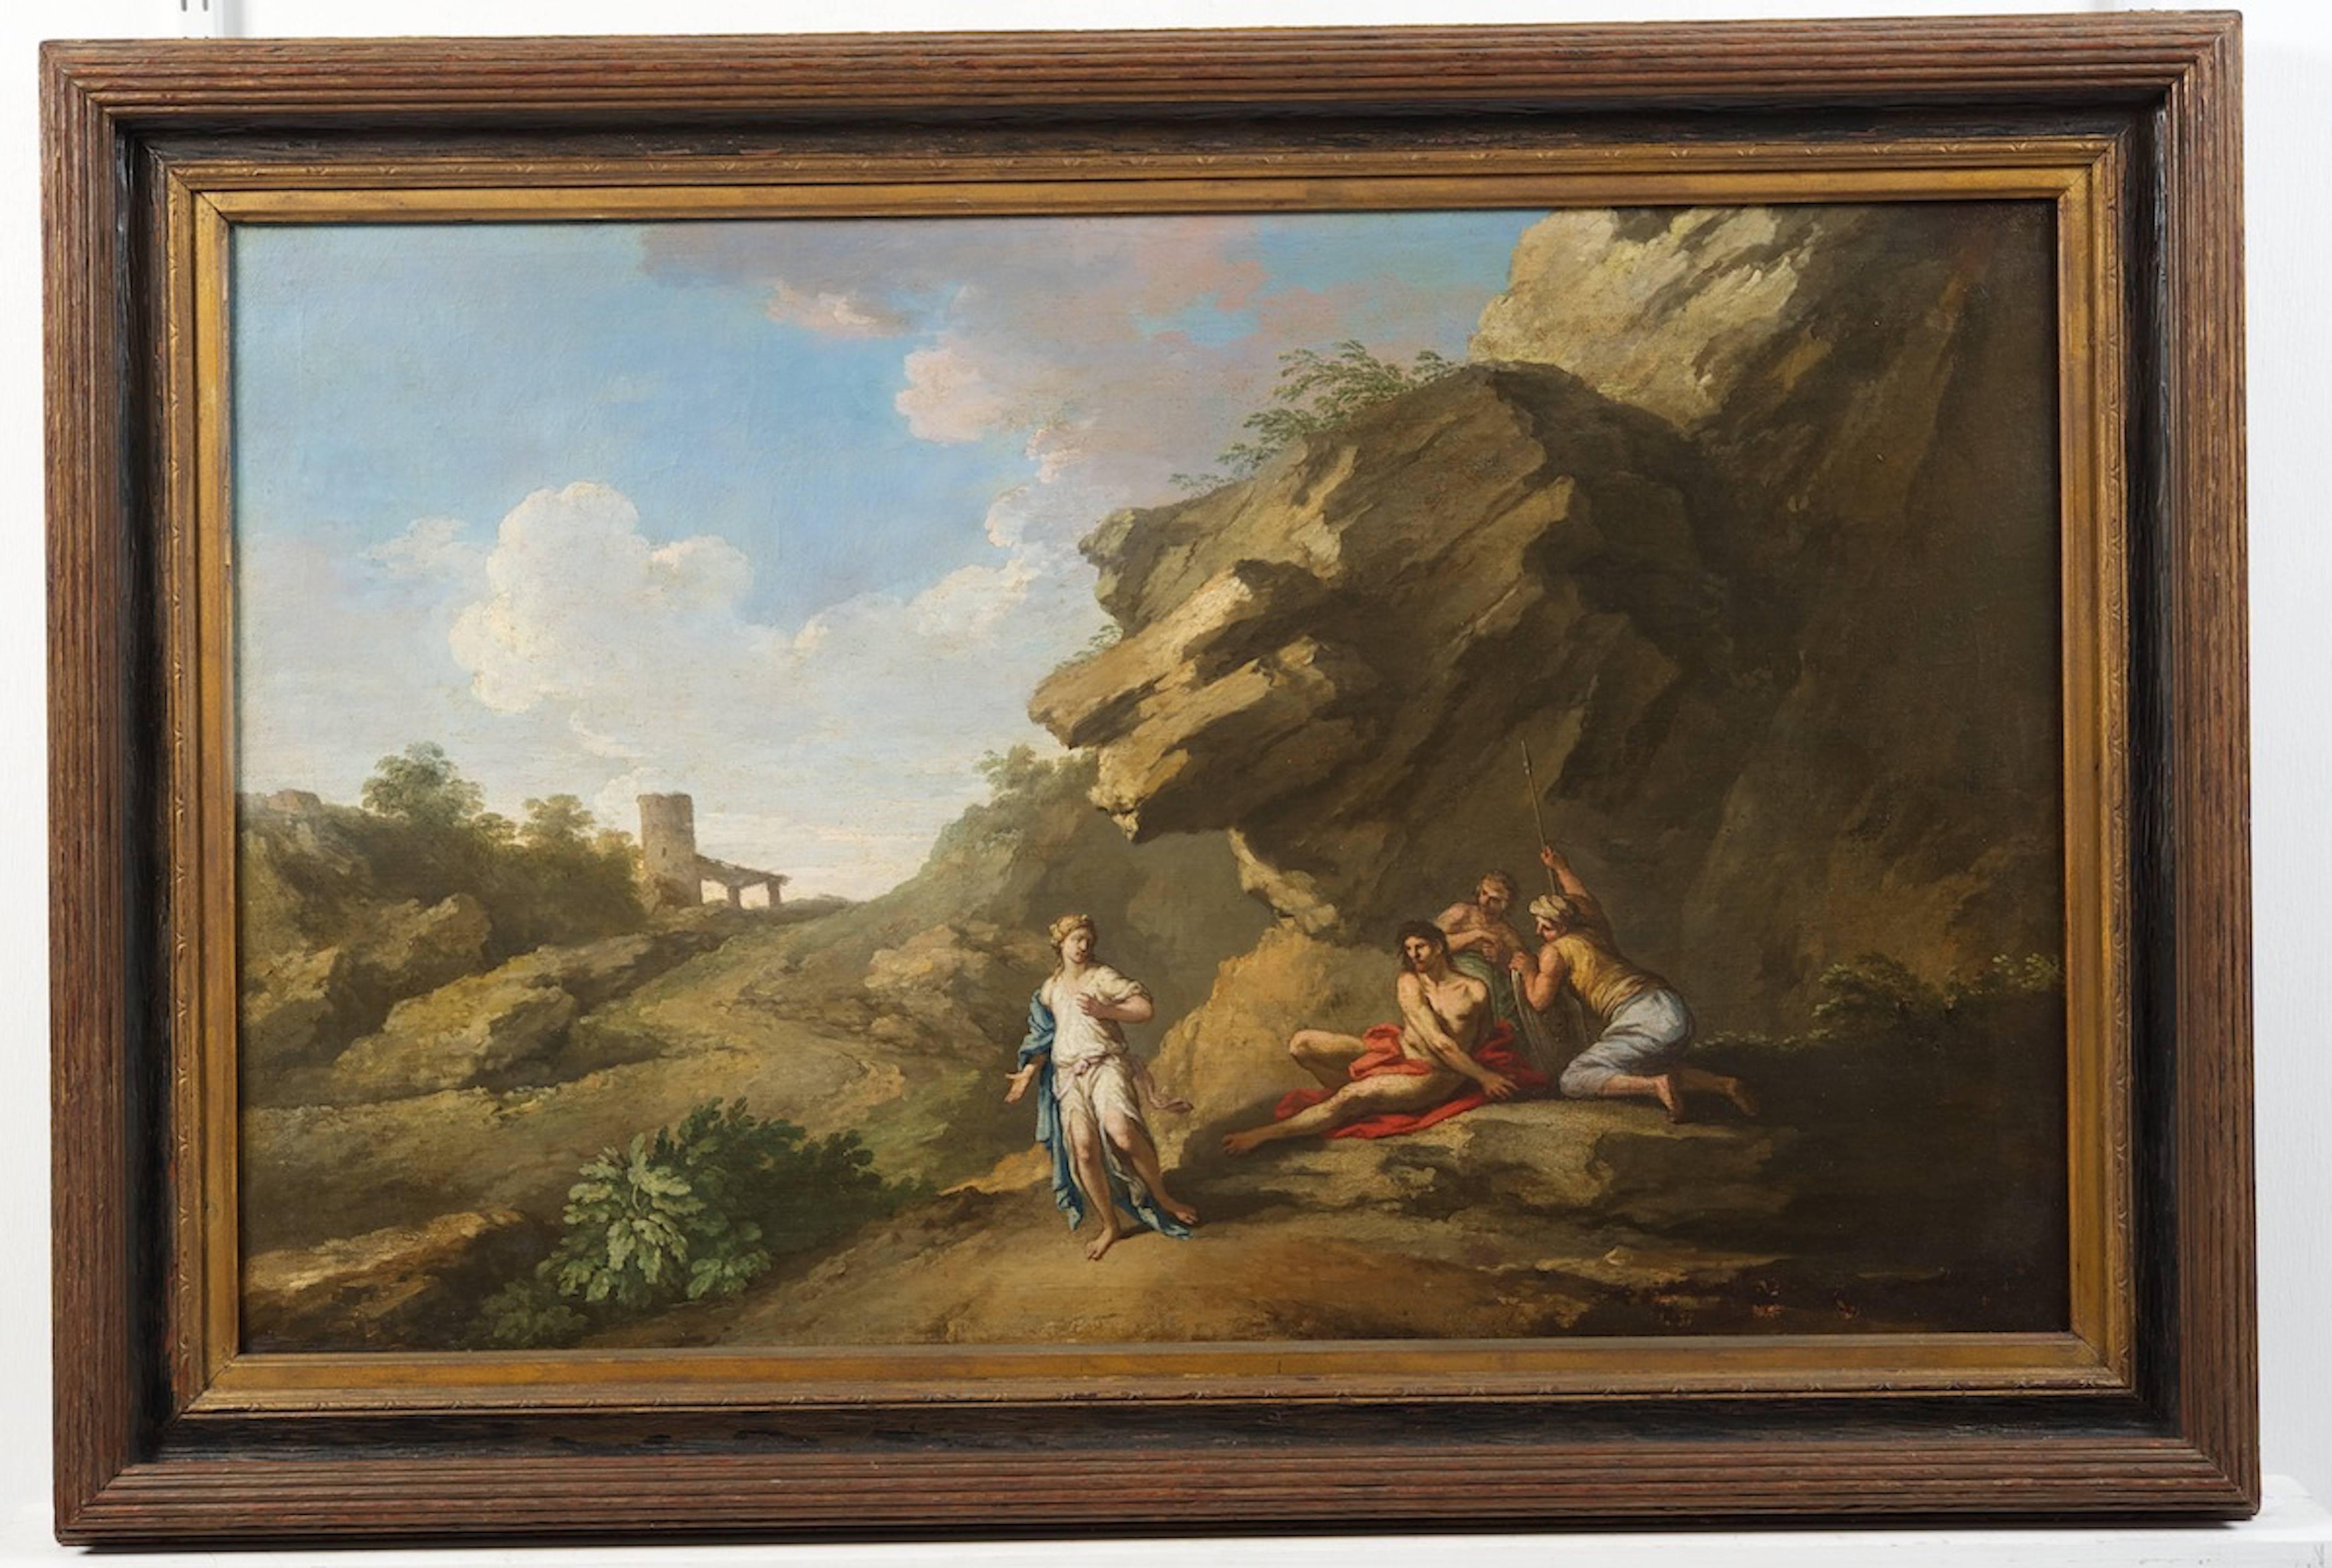 A Roman landscape oil on canvas painting with figures by Andrea Locatelli (Roma 1693-1741)

Locatelli was amongst the group of landscape painters in Rome who were widely patronised by the English 